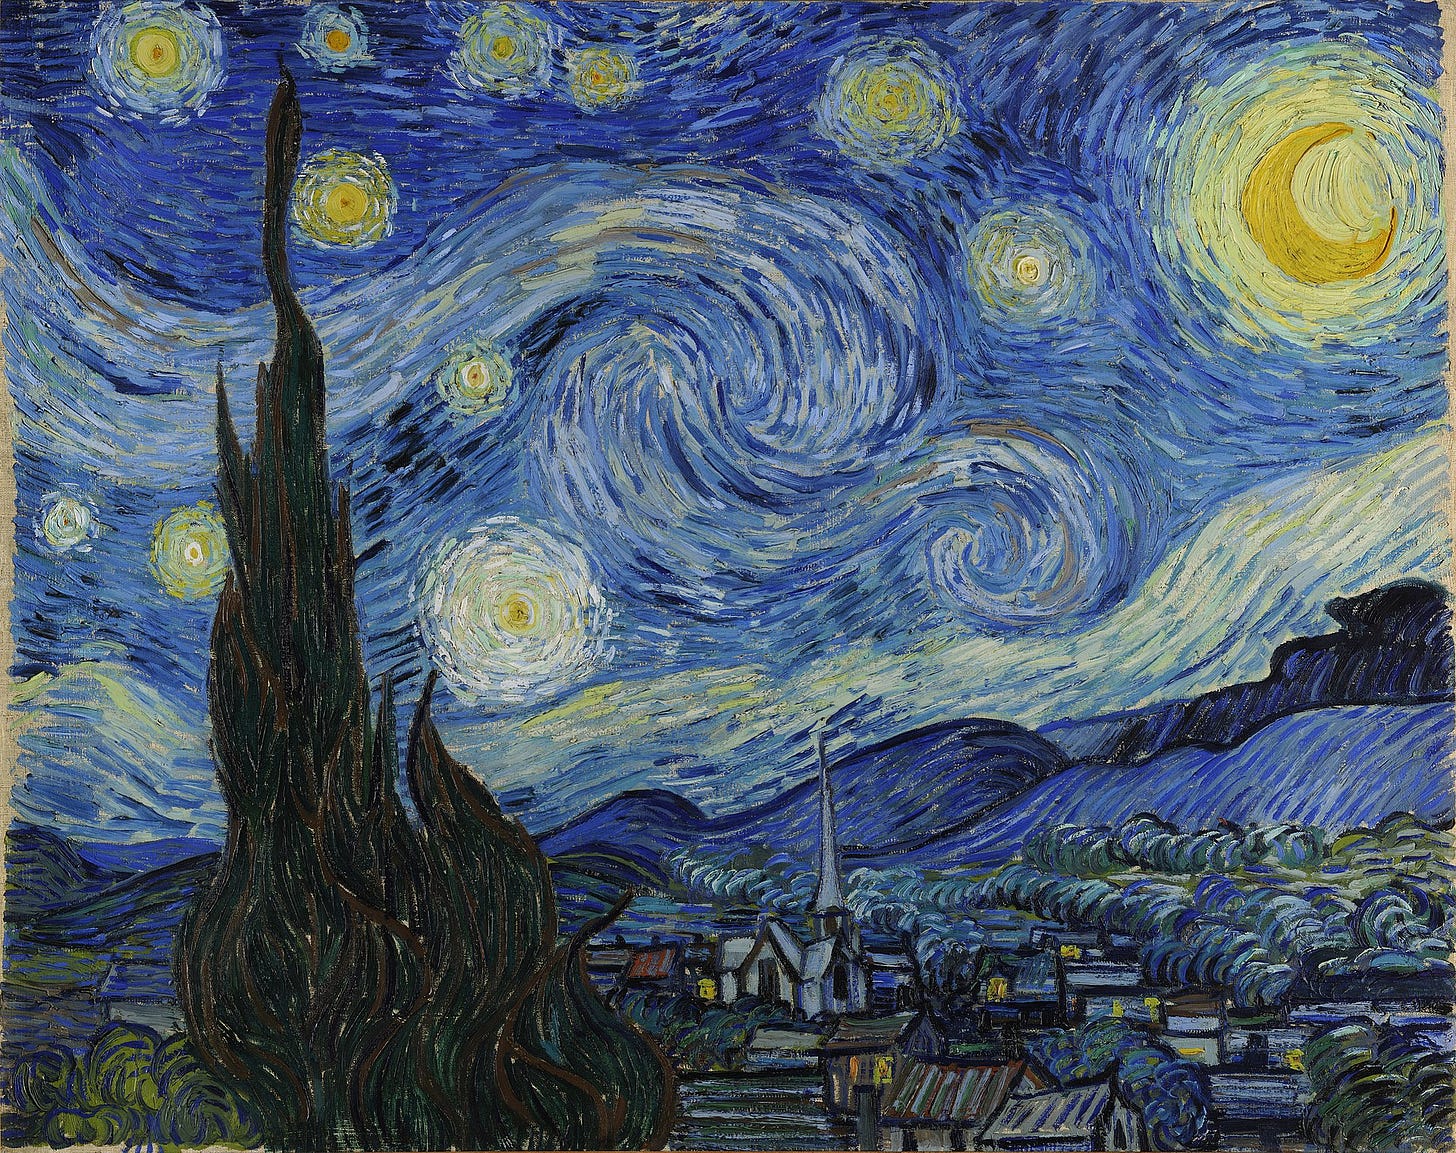 A painting of a scene at night with 10 swirly stars, Venus, and a bright yellow crescent Moon. In the background are hills, in the foreground a cypress tree and houses.